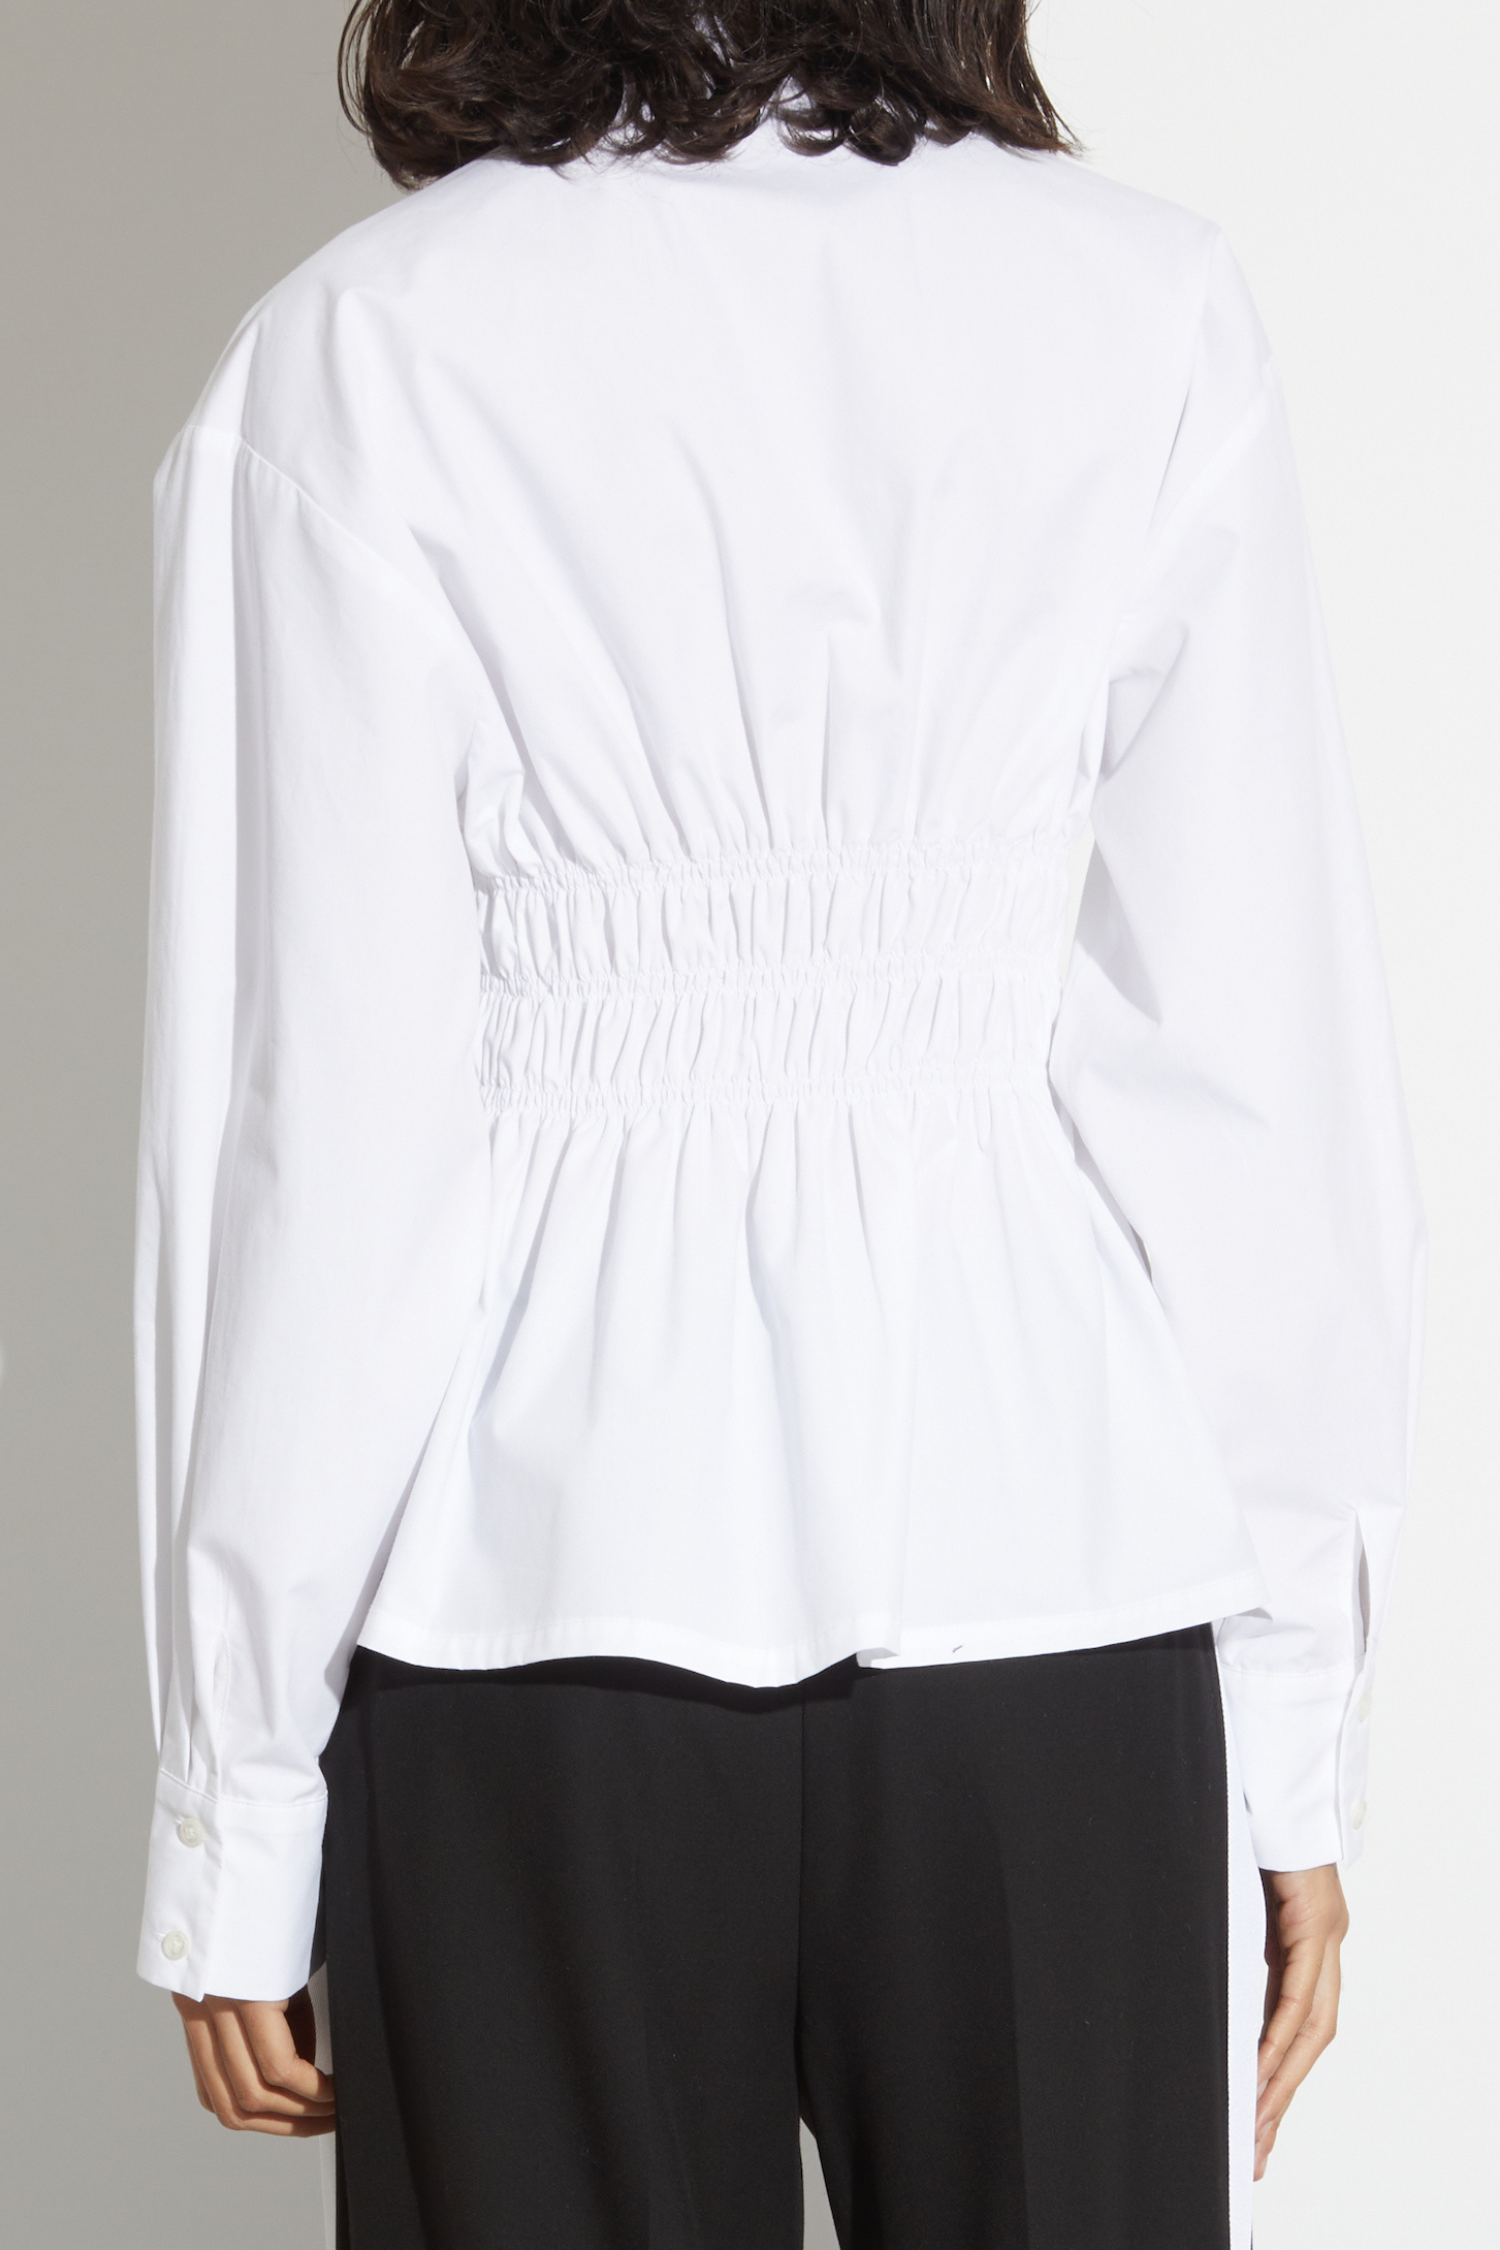 Cleone Shirt - Ruched Front Button Up Shirt in White